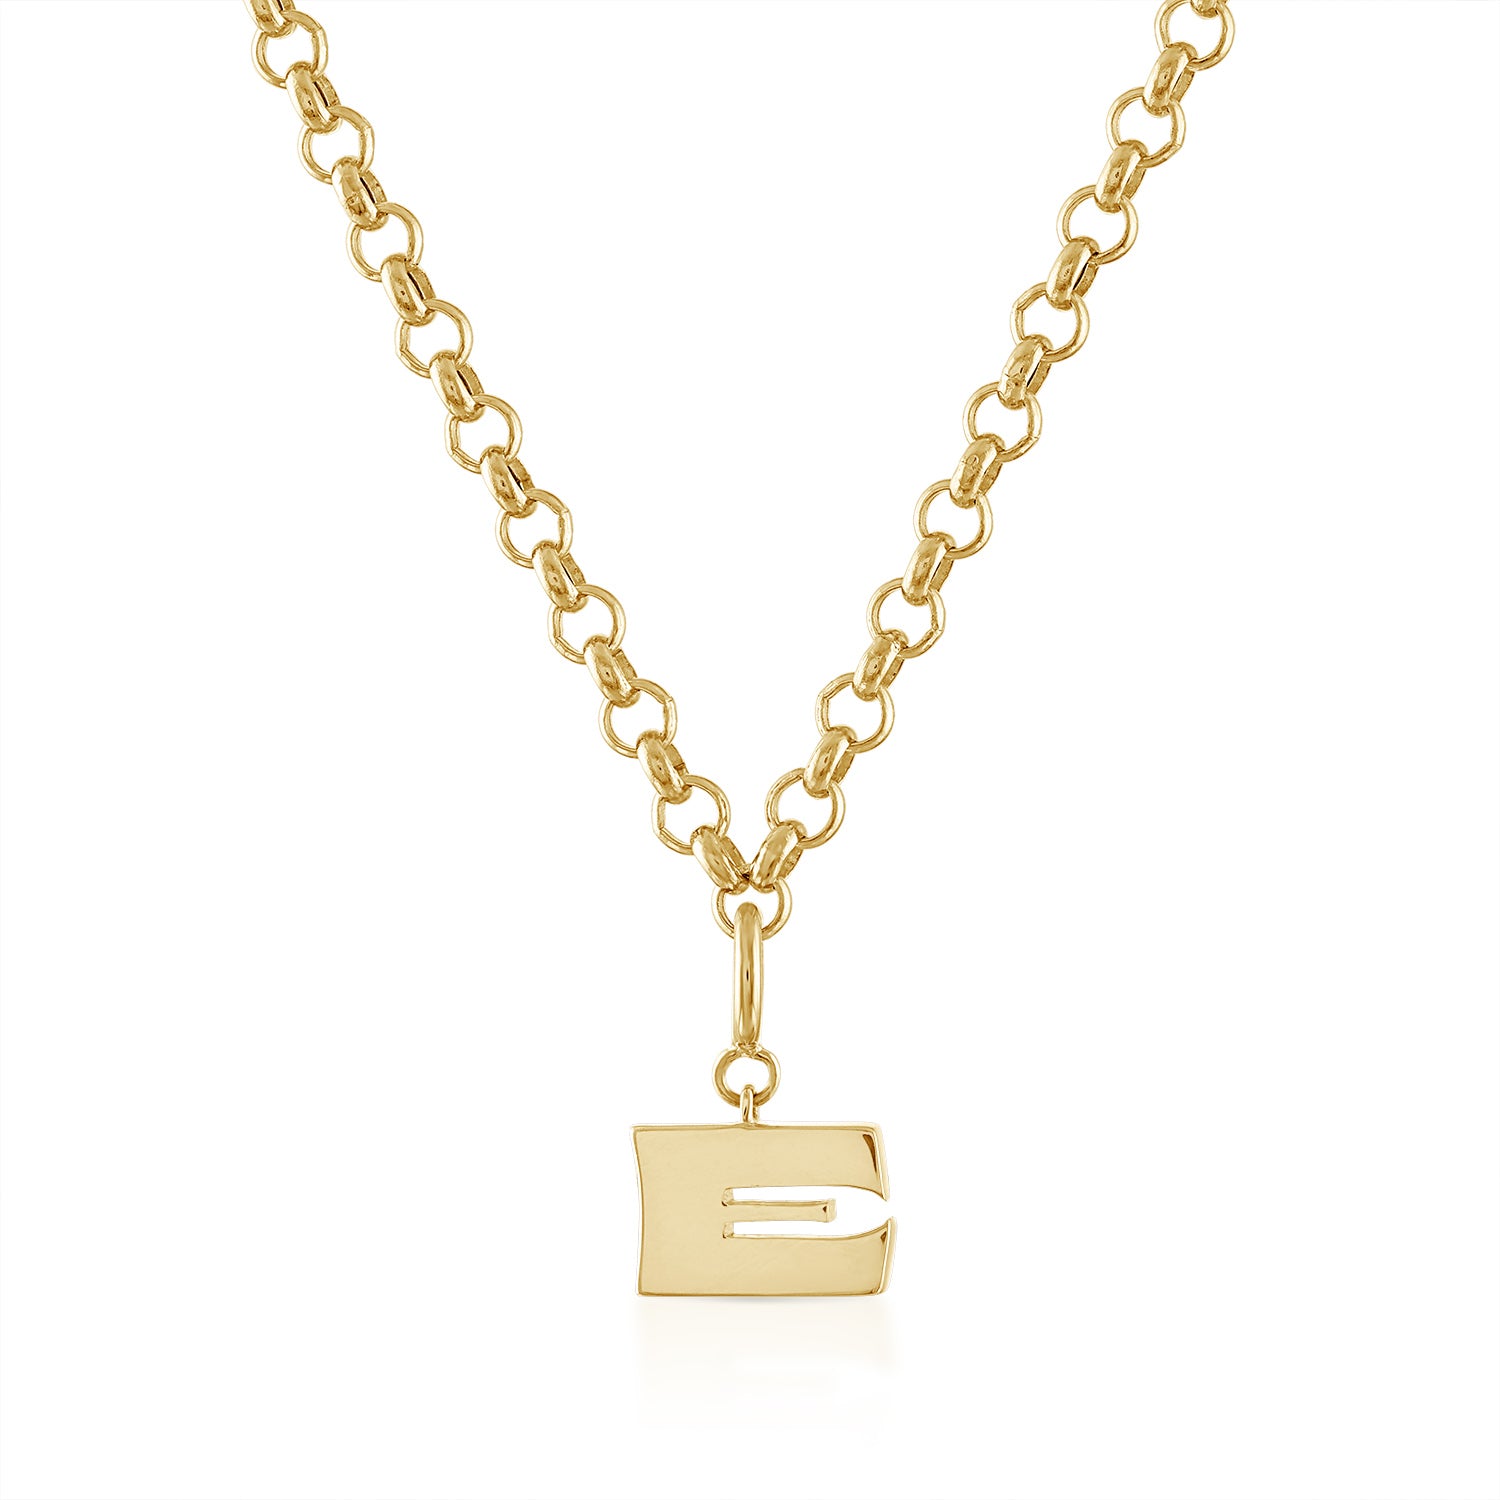 More is More Gold Letter Pendant